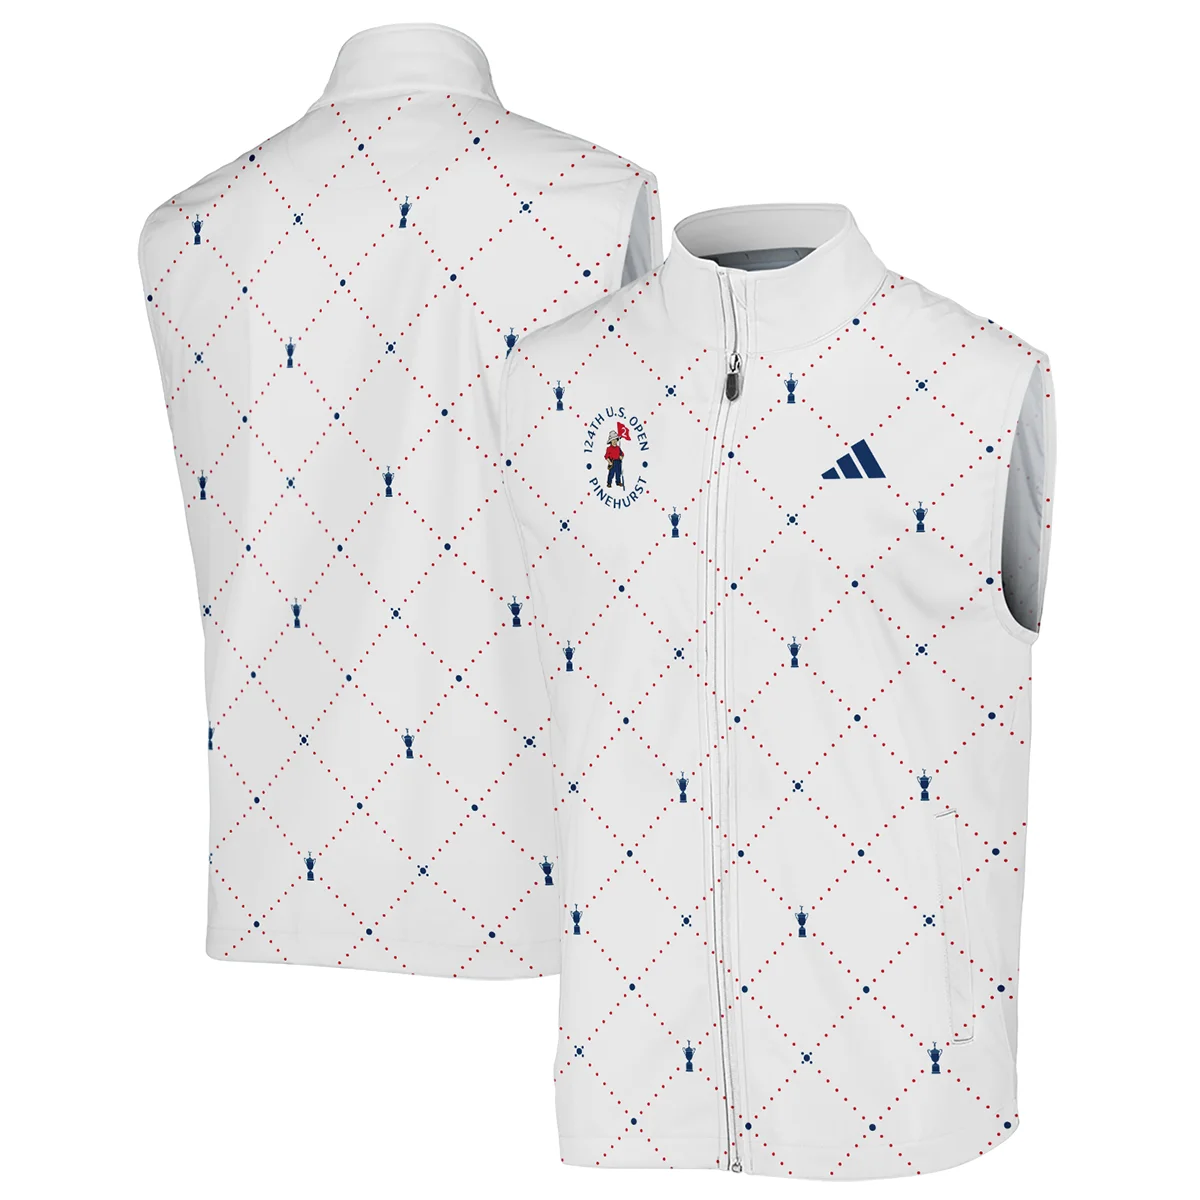 Argyle Pattern With Cup 124th U.S. Open Pinehurst Adidas Long Polo Shirt Style Classic Long Polo Shirt For Men